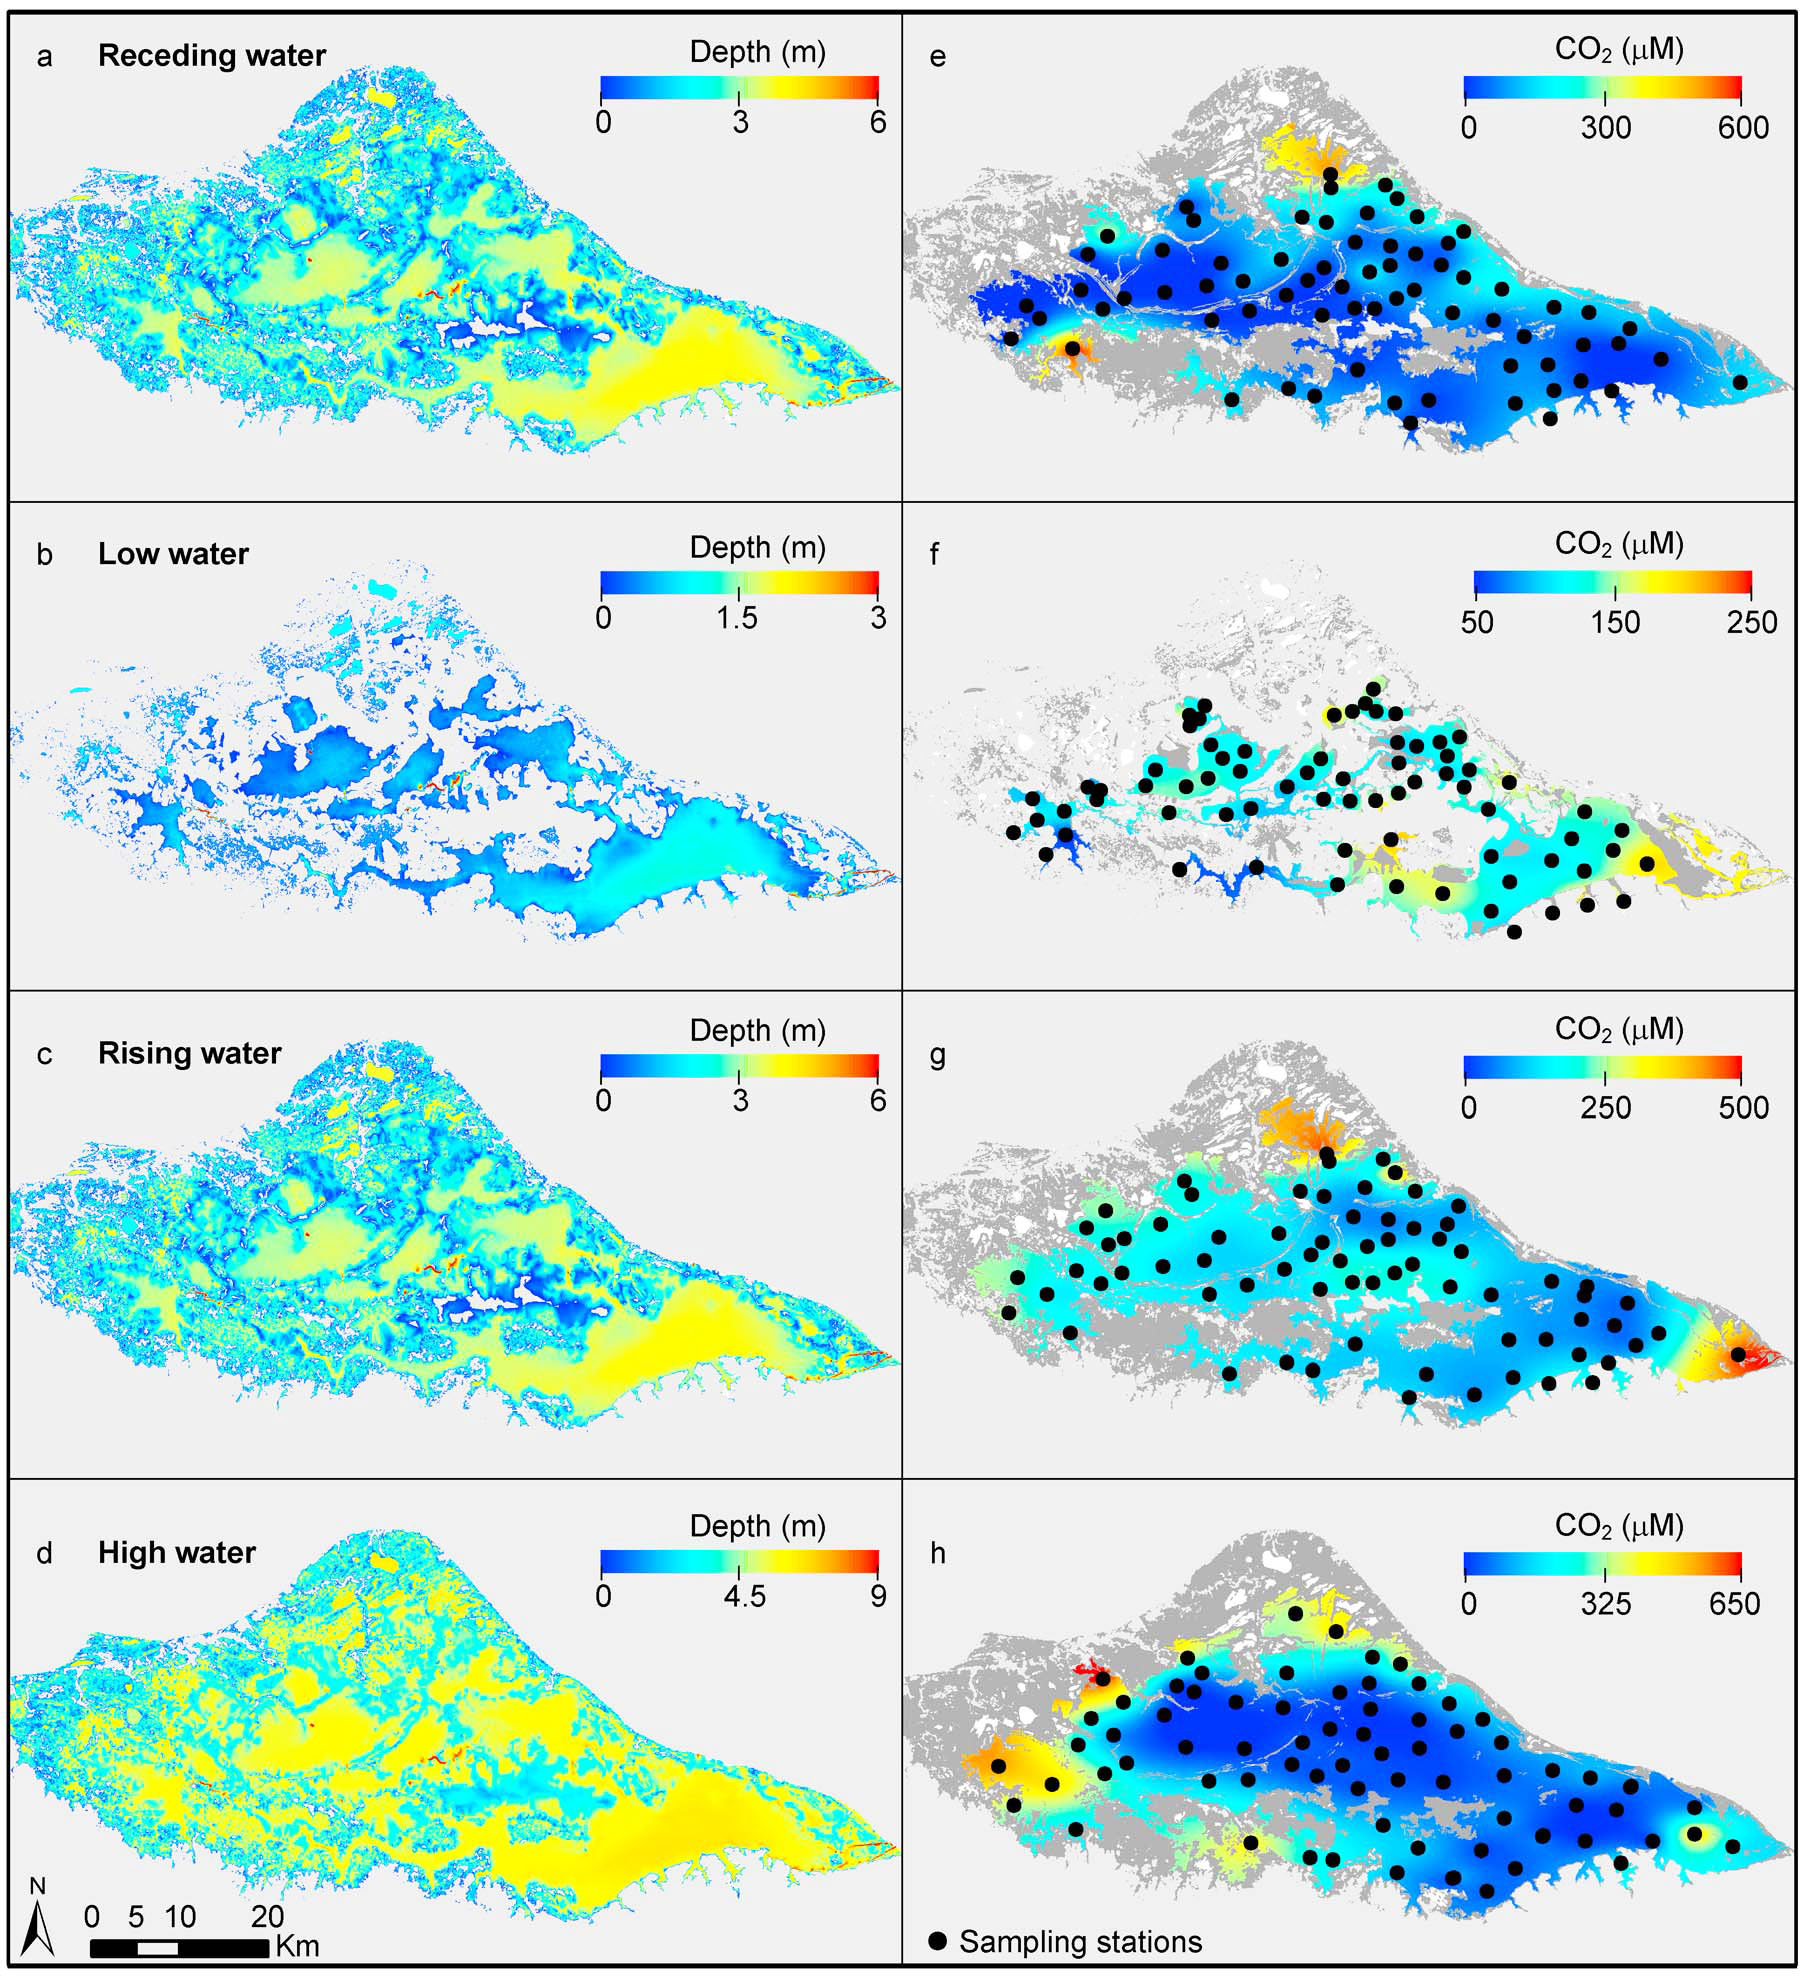 hydrological stages and map of sampling stagtes